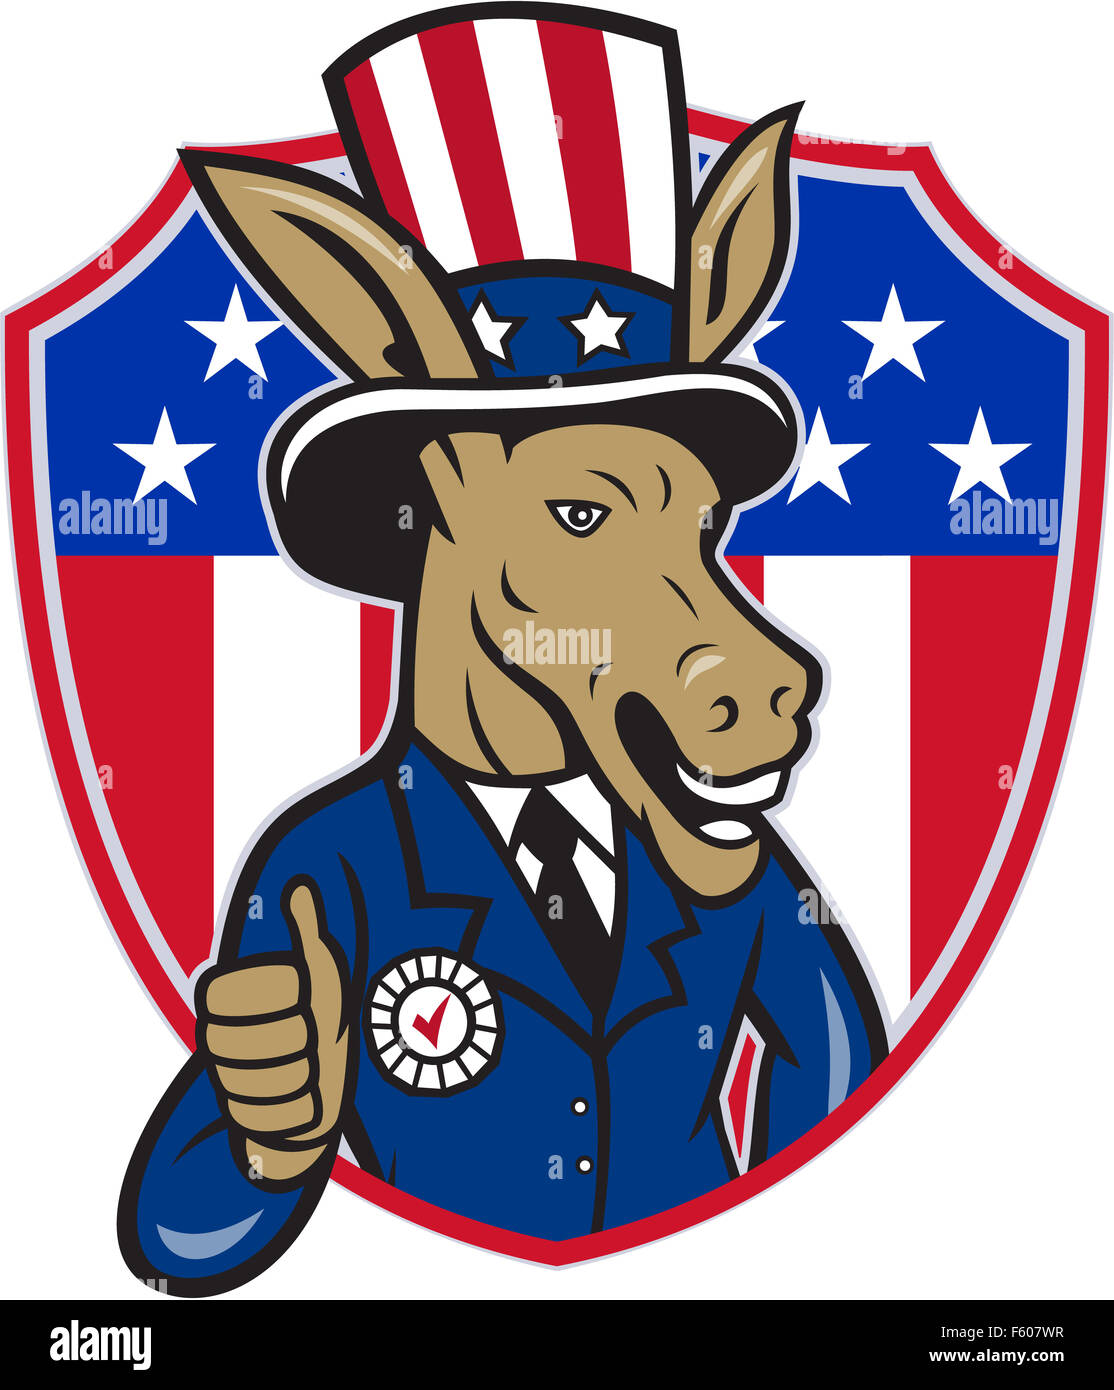 Illustration of a democrat donkey mascot of the democratic grand old party gop wearing hat and suit showing thumbs up set inside shield with american stars and stripes in the background done in cartoon style. Stock Photo